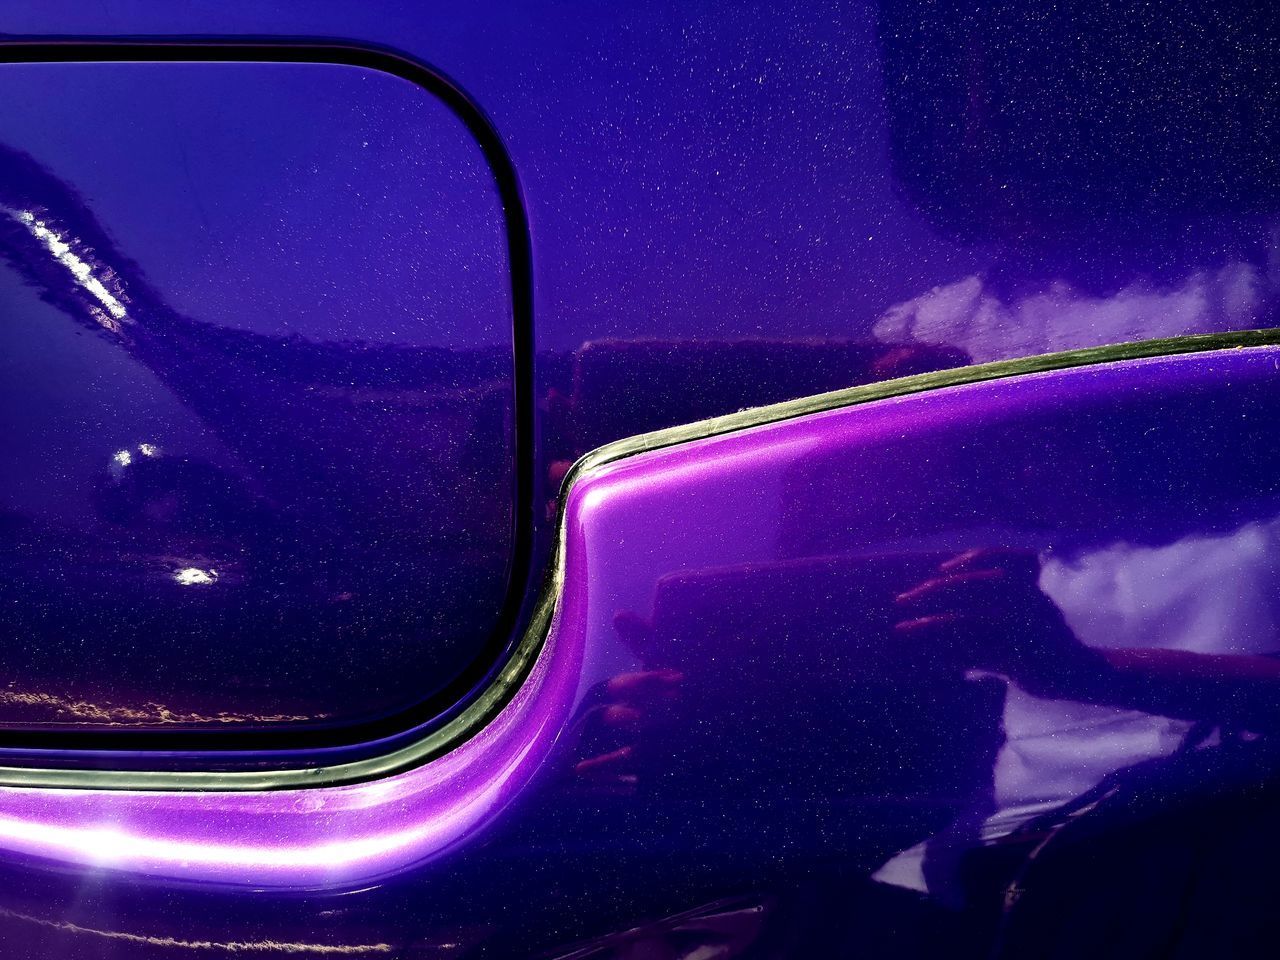 REFLECTION OF MAN IN GLASS CAR